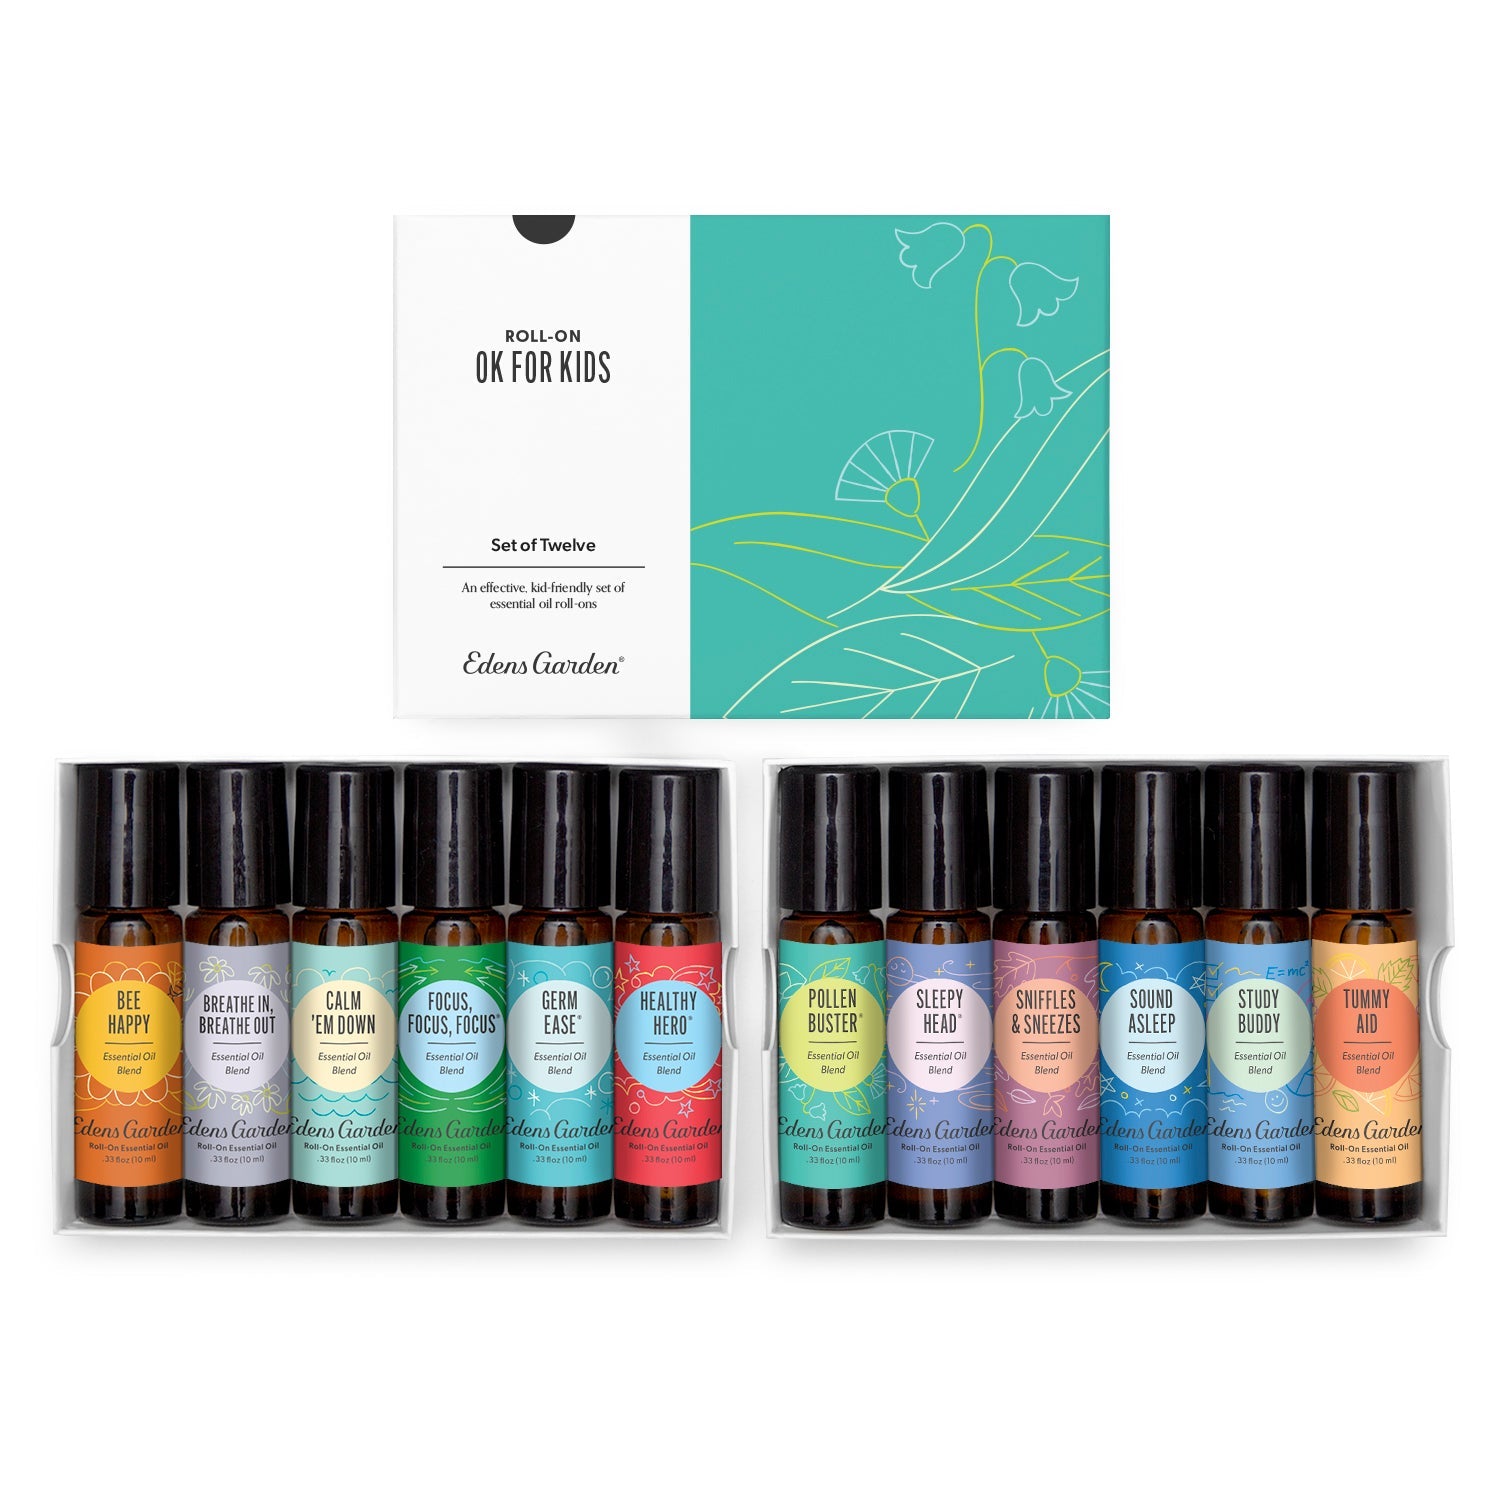 OK For Kids Roll-On Essential Oil 12 Set